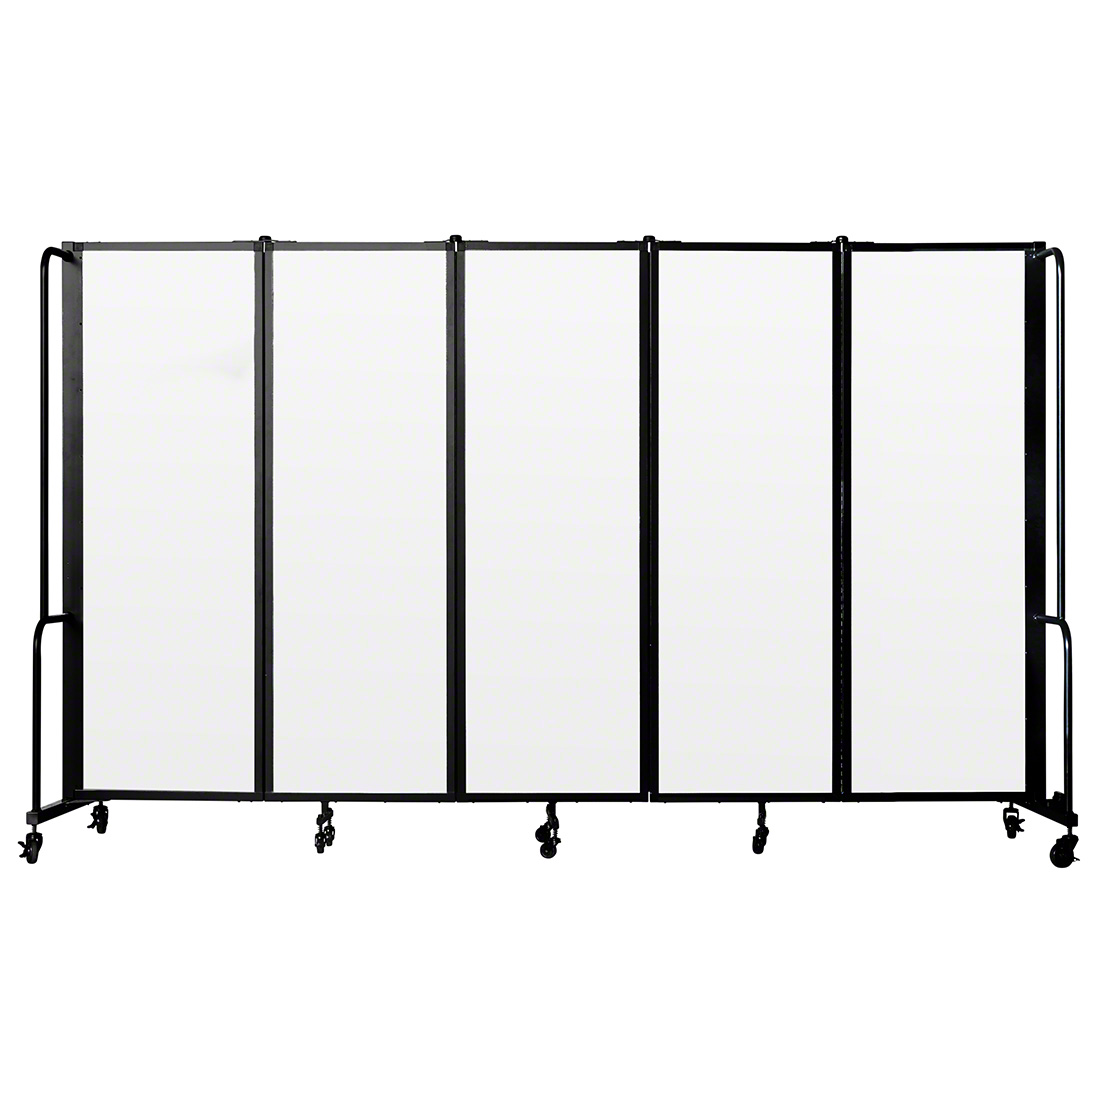 NPS Portable Room Divider, 5 Sections, Clear Acrylic